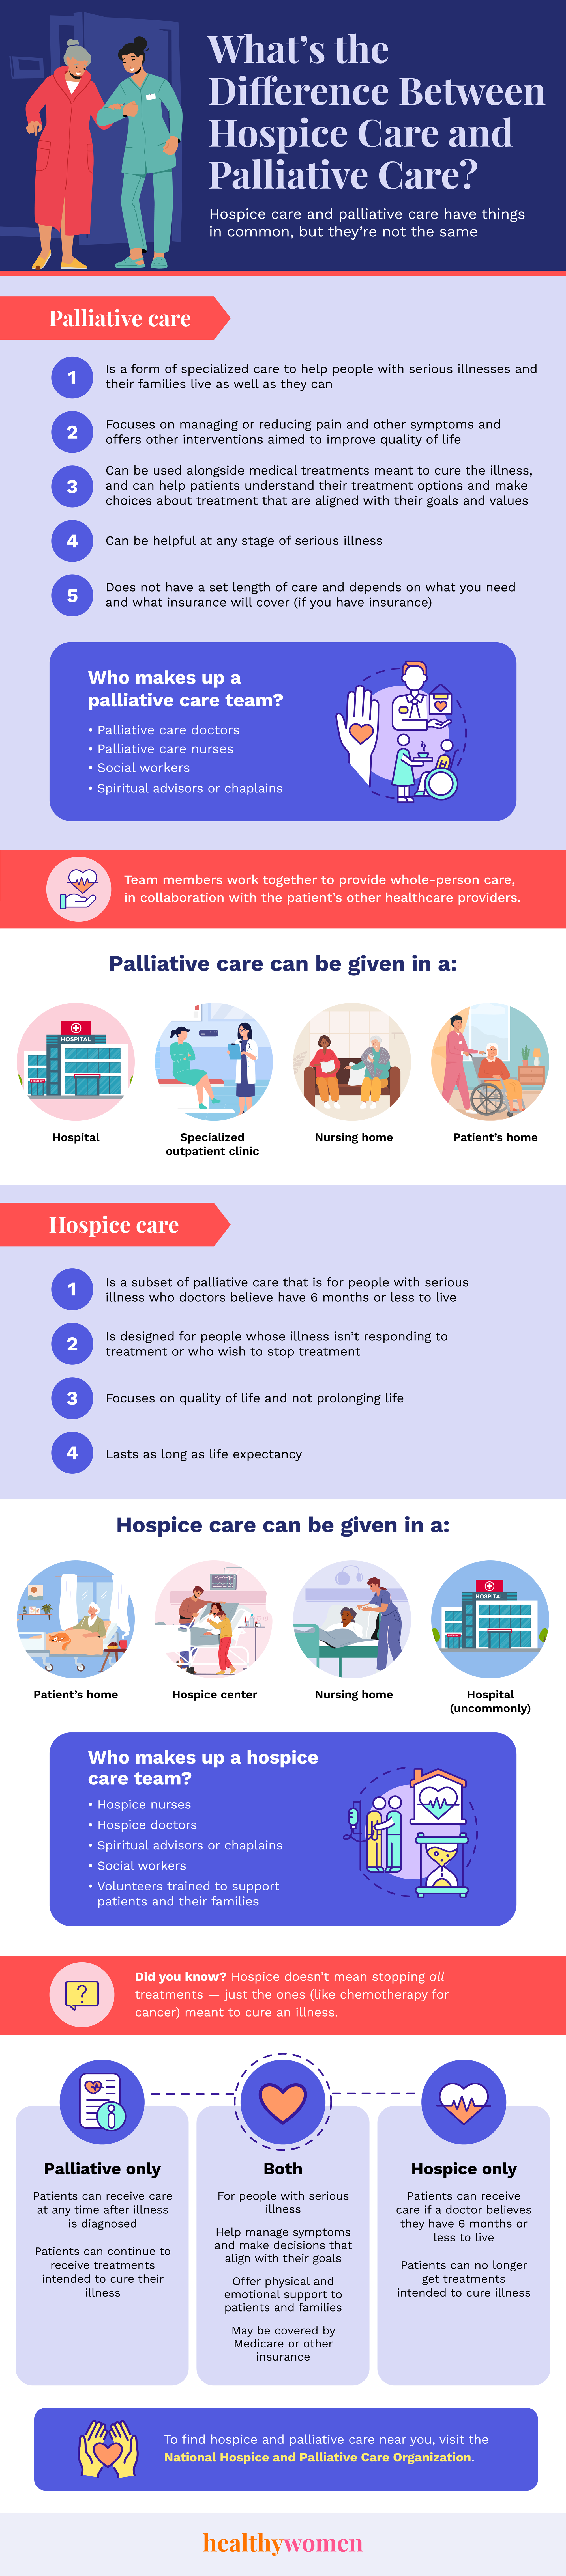 Infographic Whatu2019s the Difference Between Hospice and Palliative Care?. Click the image to open the PDF